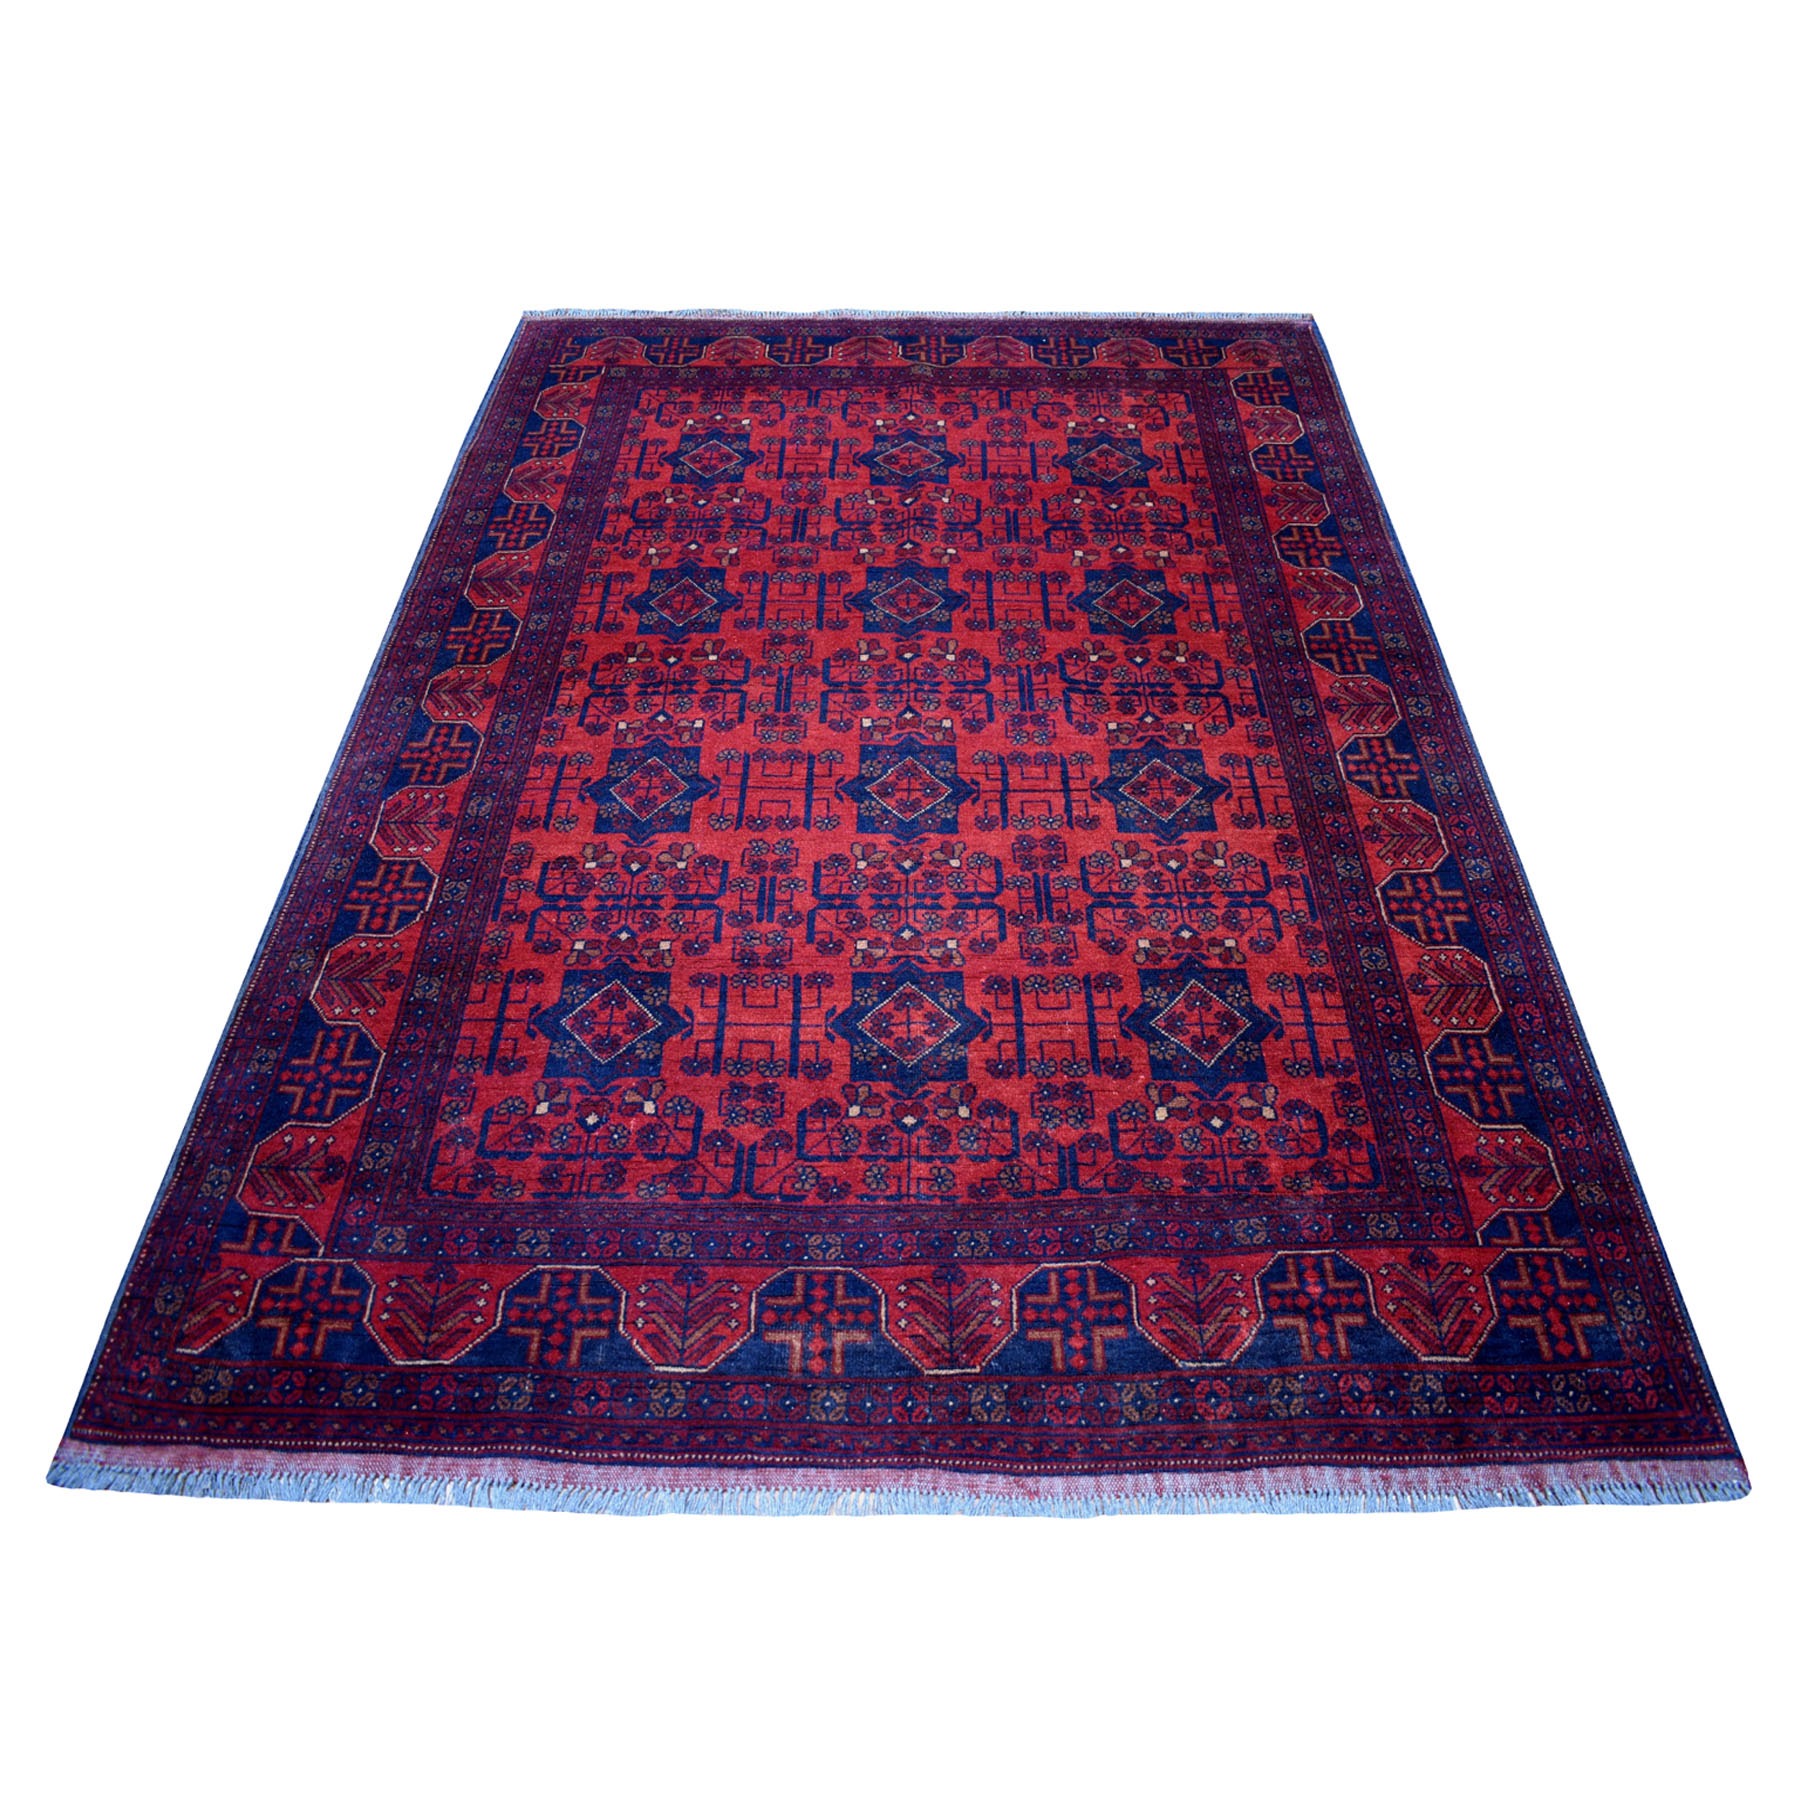 5'7"X7'9" Deep And Saturated Red Geometric Design Afghan Andkhoy Pure Wool Hand-Knotted Oriental Rug moaecc97